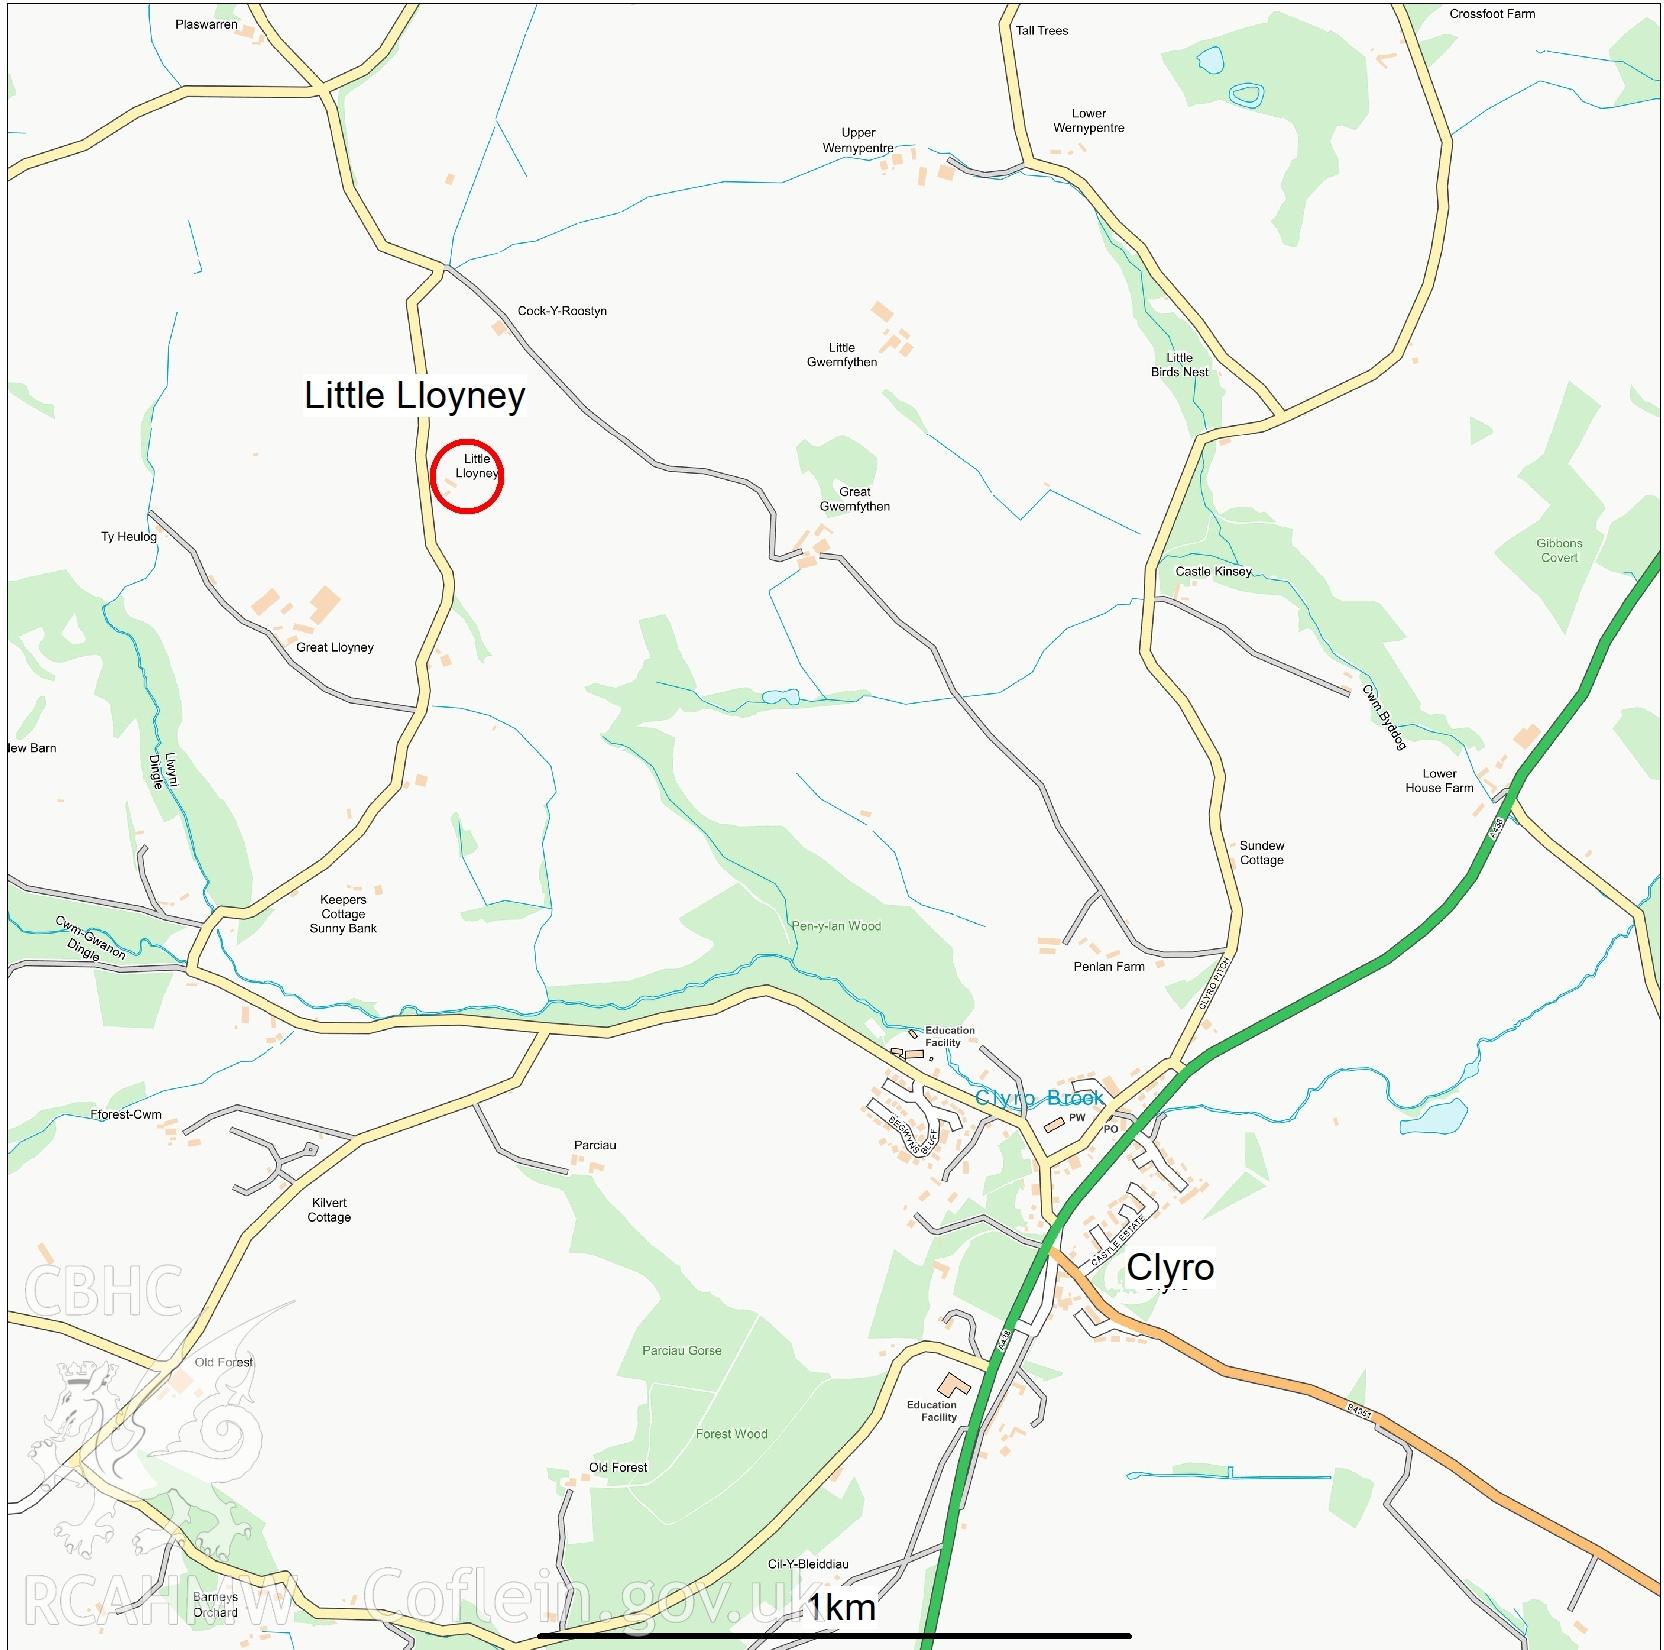 Copy of modern map showing location of Little Lloyney relating to CPAT Project 2355: Little Lloyney Farm, Clyro, Powys, 2019. Prepared by Will Logan of Clwyd Powys Archaeological Trust. Project no. 2355. HER event PRN: 140287.